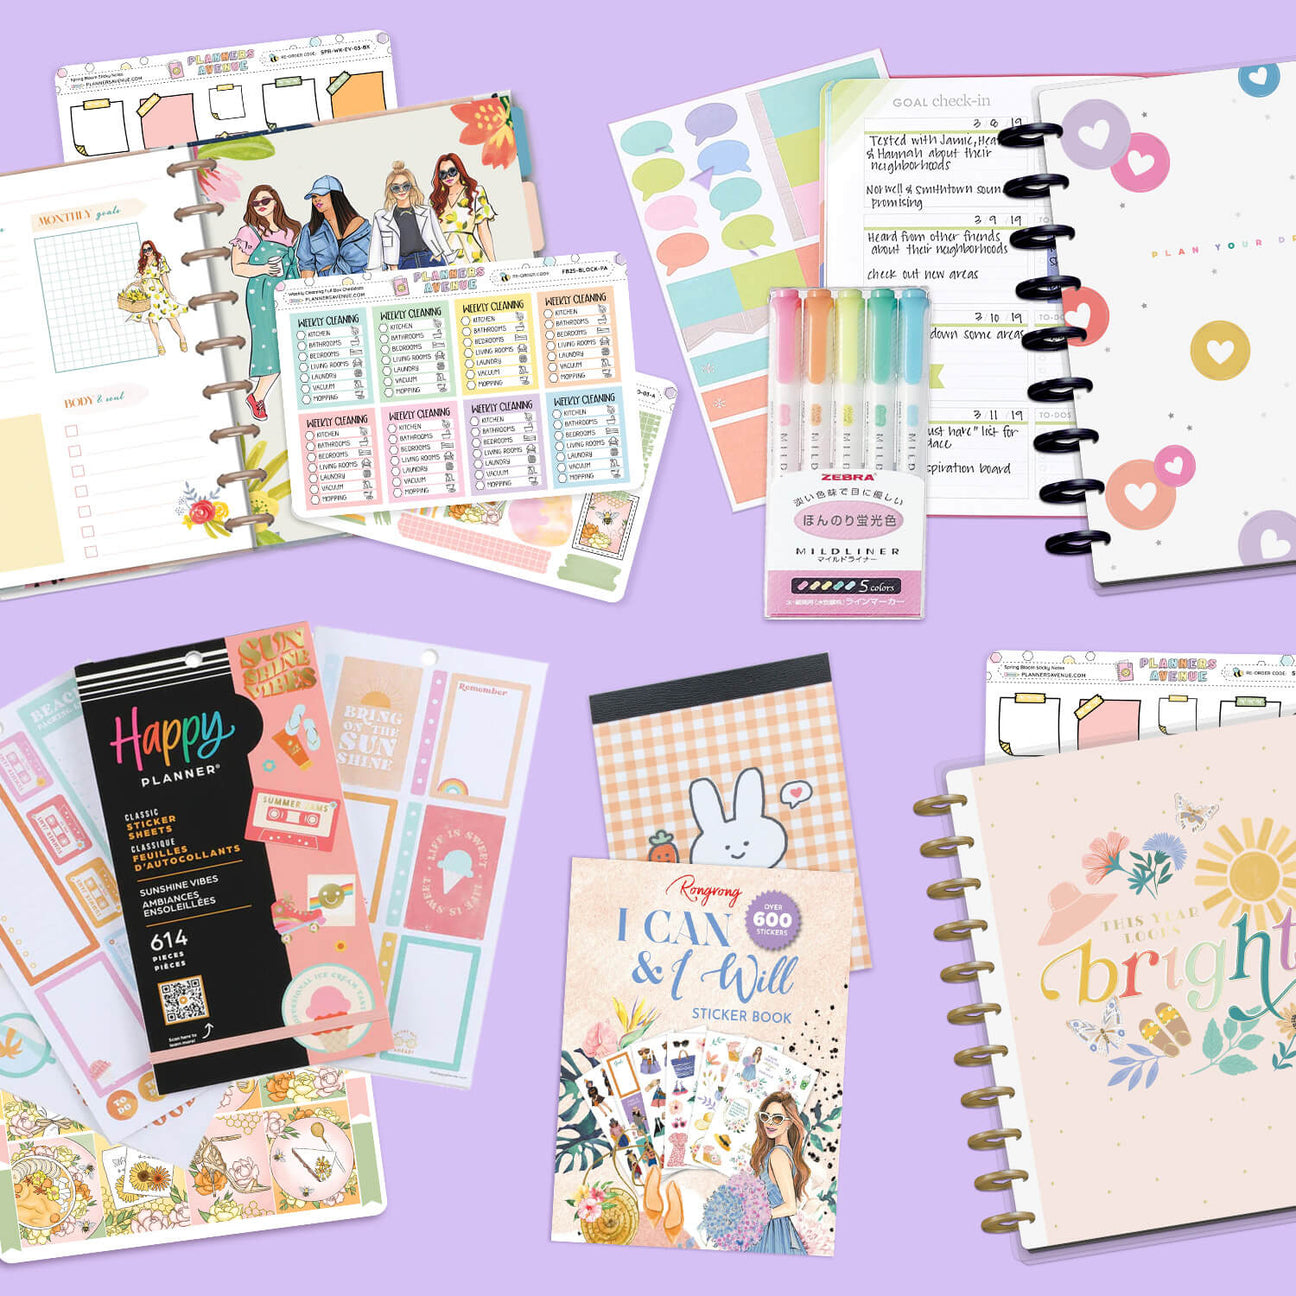 Stationery Planner Supplies: Your One-Stop Shop for Planning Essentials